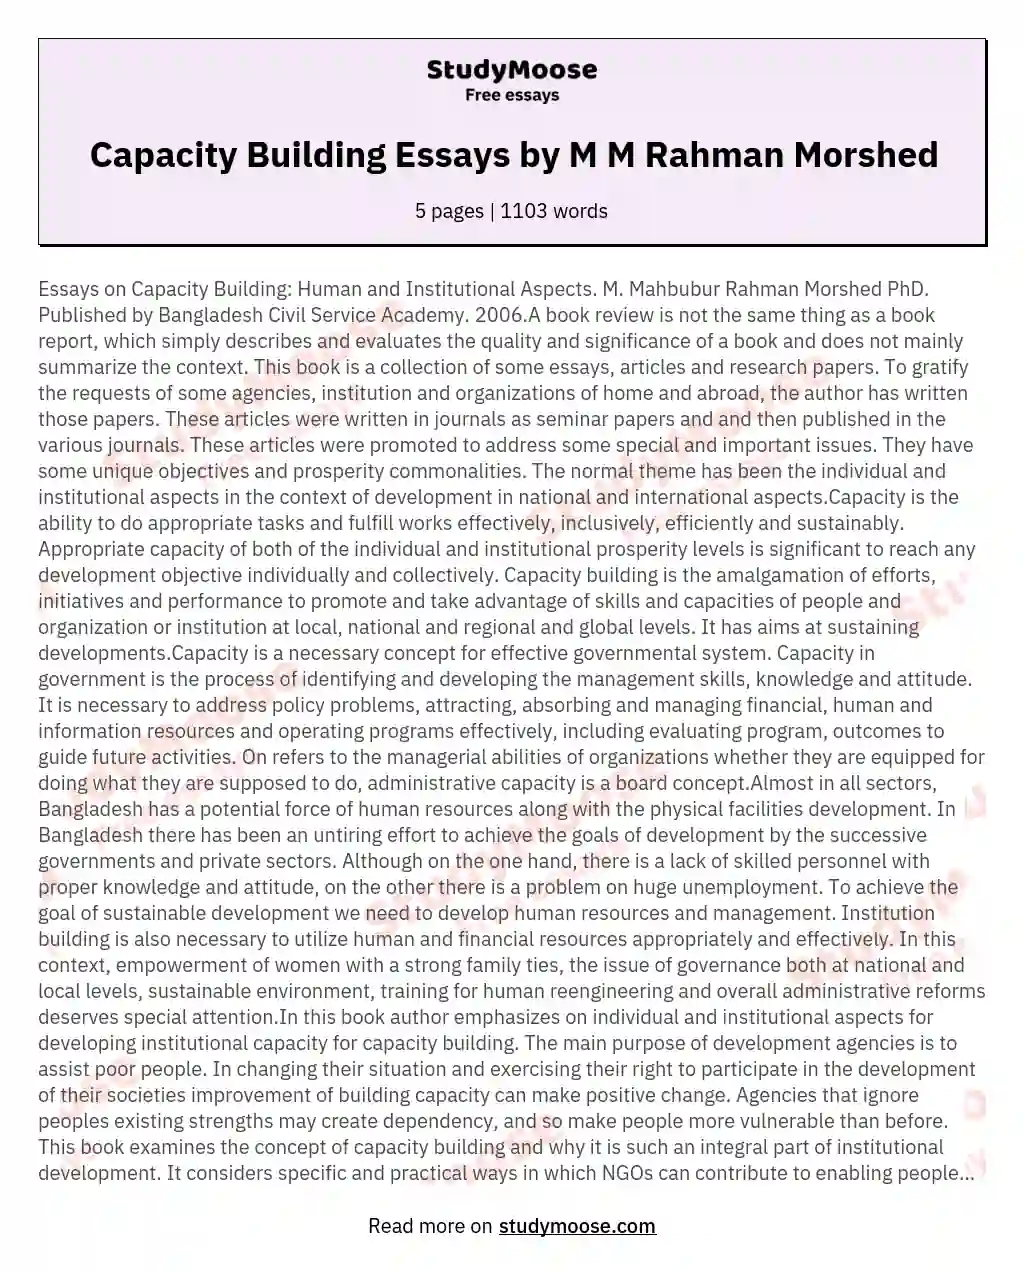 Essays on Capacity Building Human and Institutional Aspects M Mahbubur Rahman Morshed